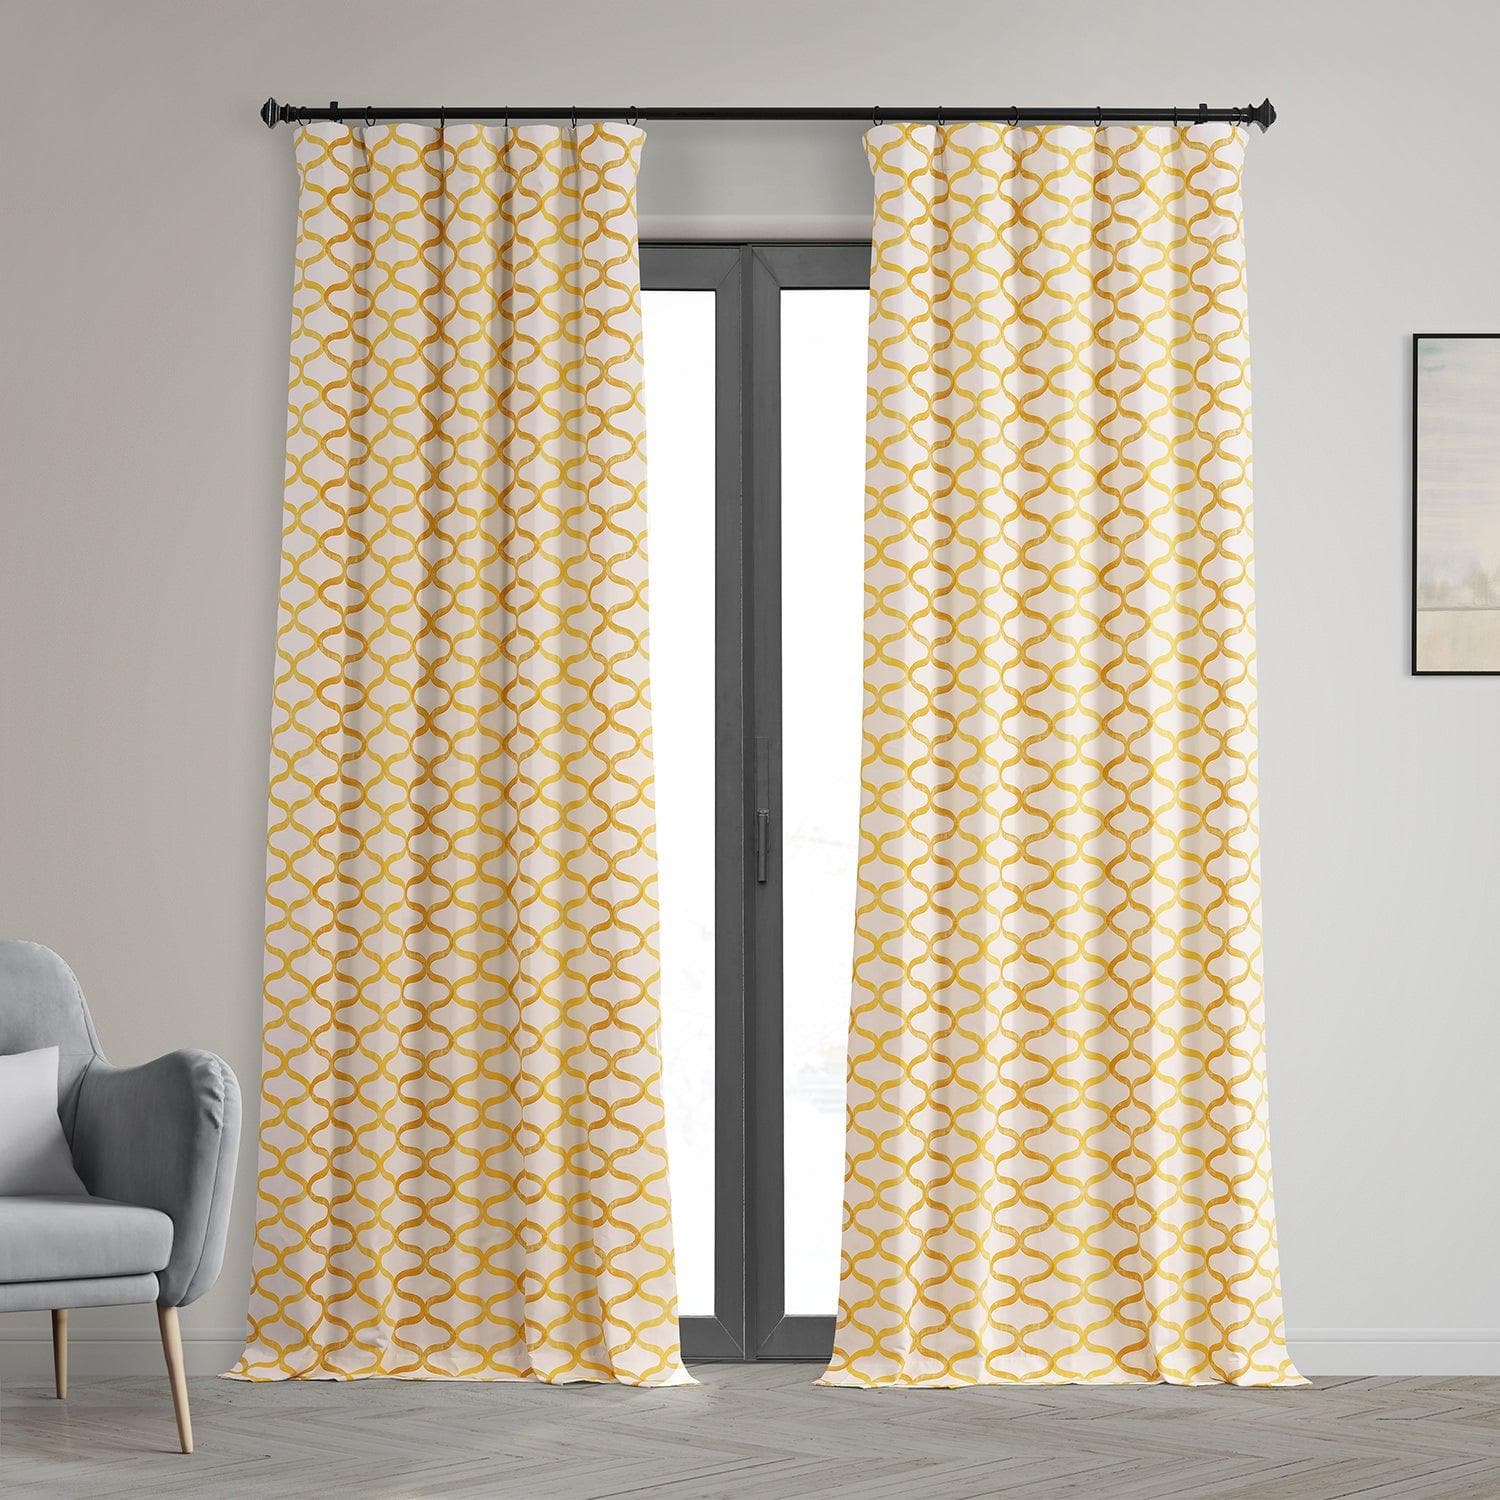 Illusions Yellow Printed Cotton Hotel Blackout Curtain